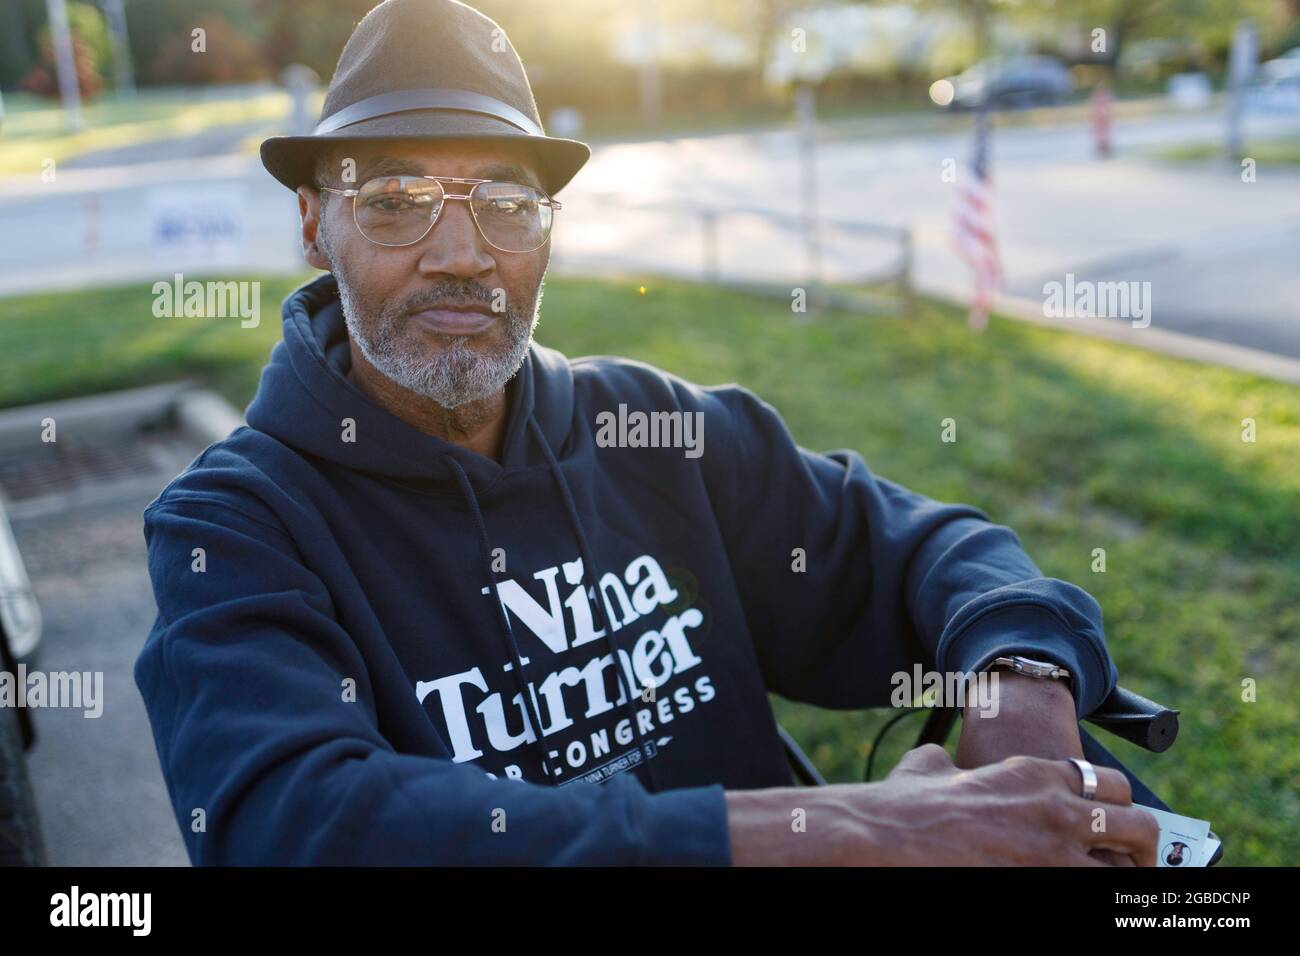 Erwin Johnson, 61, of Cleveland, Ohio sits for a portrait outside of the Warrensville Heights Recreation Center while a car with a Shontel Brown sticker drives by. Johnson came to show support for Nina Turner because, “I think she's the best candidate. She's been a state rep, She's the most qualified.” Voters came out to the polls for a special election in Ohio's 11th district. The two main leading candidates for this House of Representatives seat are two Democrats, Nina Turner, a progressive candidate, and Shontel Brown, who represents the traditional Democratic establishment. (Photo by Steph Stock Photo